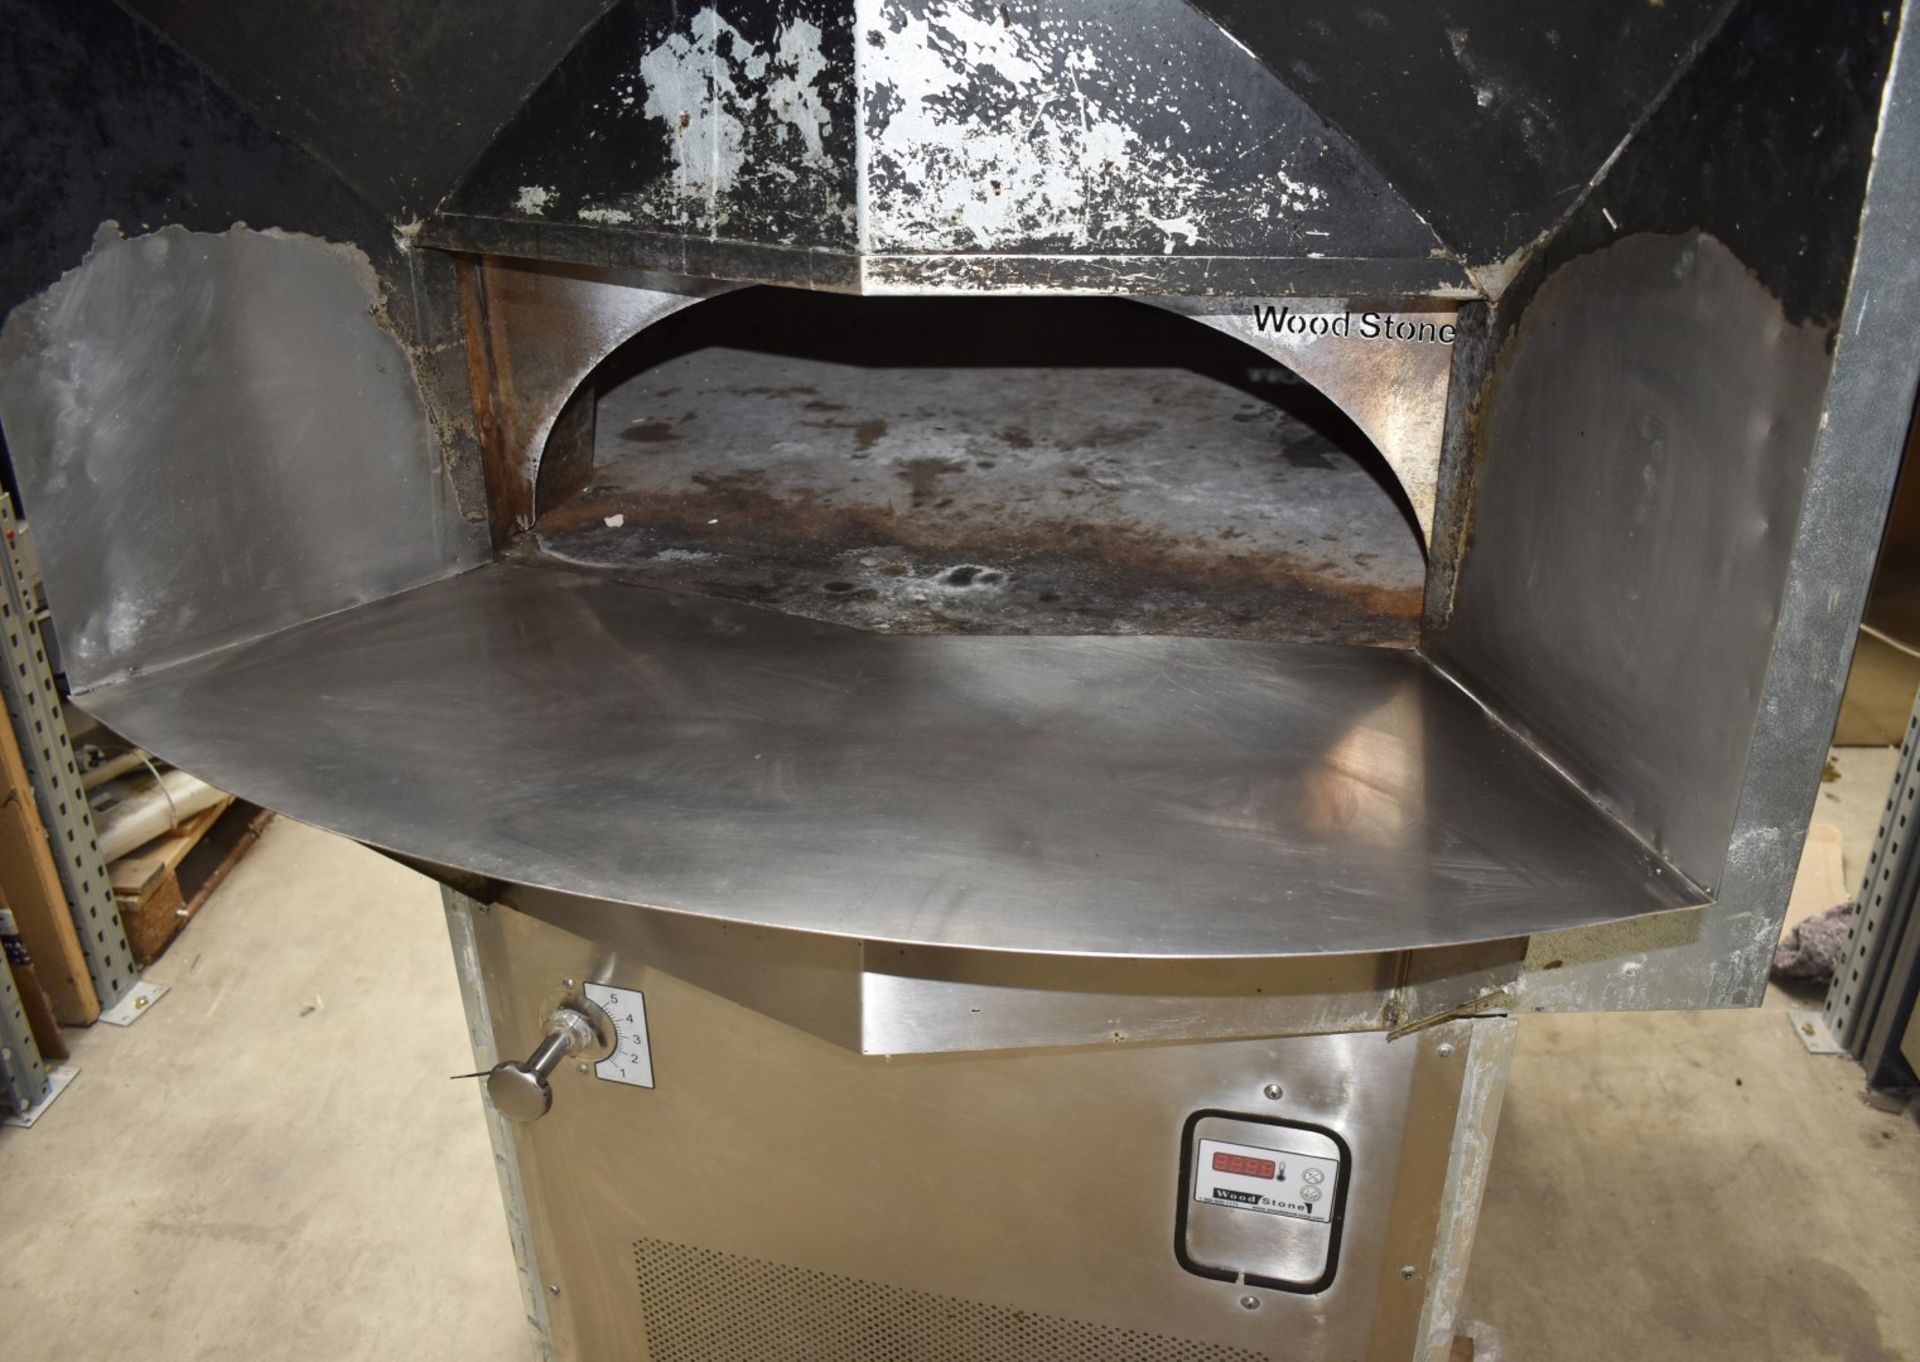 1 x Woodstone Mountain Series Commercial Gas Fired Pizza Oven - Approx RRP £25,000 - Image 21 of 25